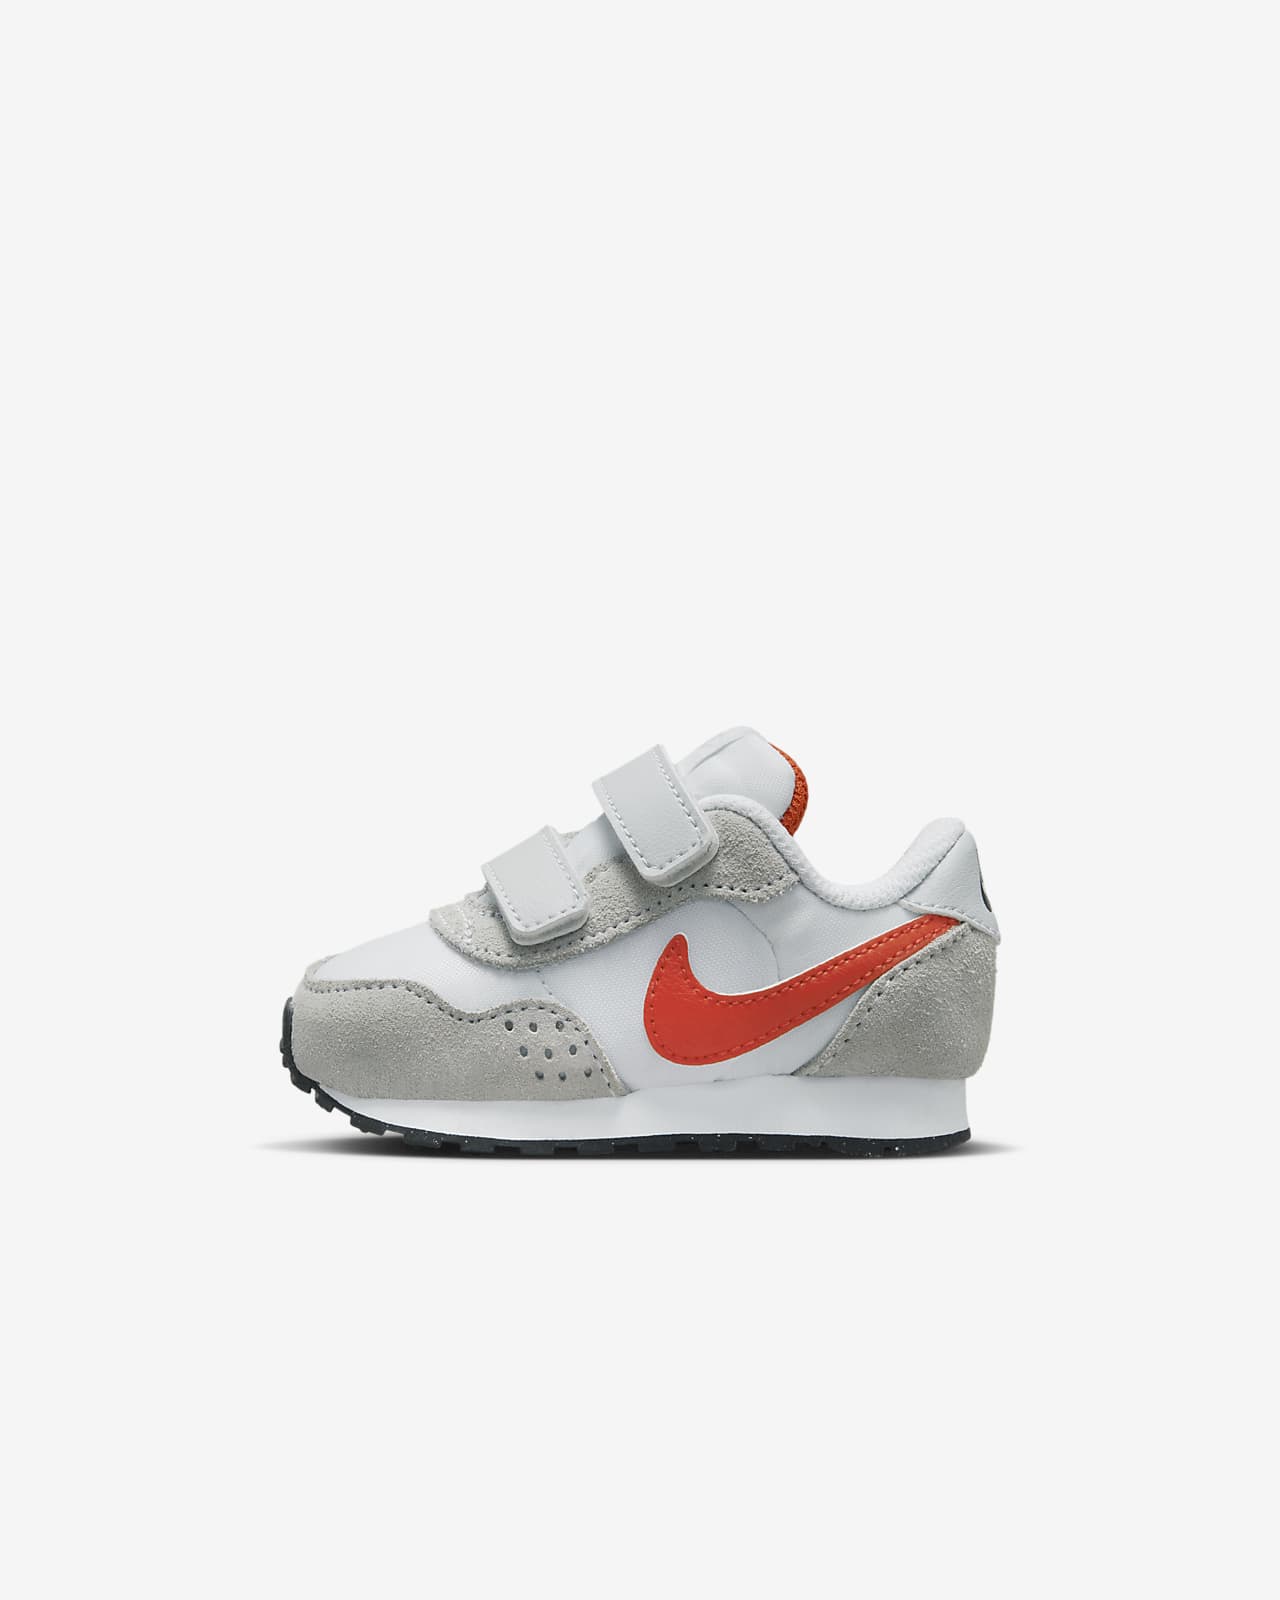 Surtido Capilares terremoto Nike MD Valiant Baby and Toddler Shoe. Nike ID